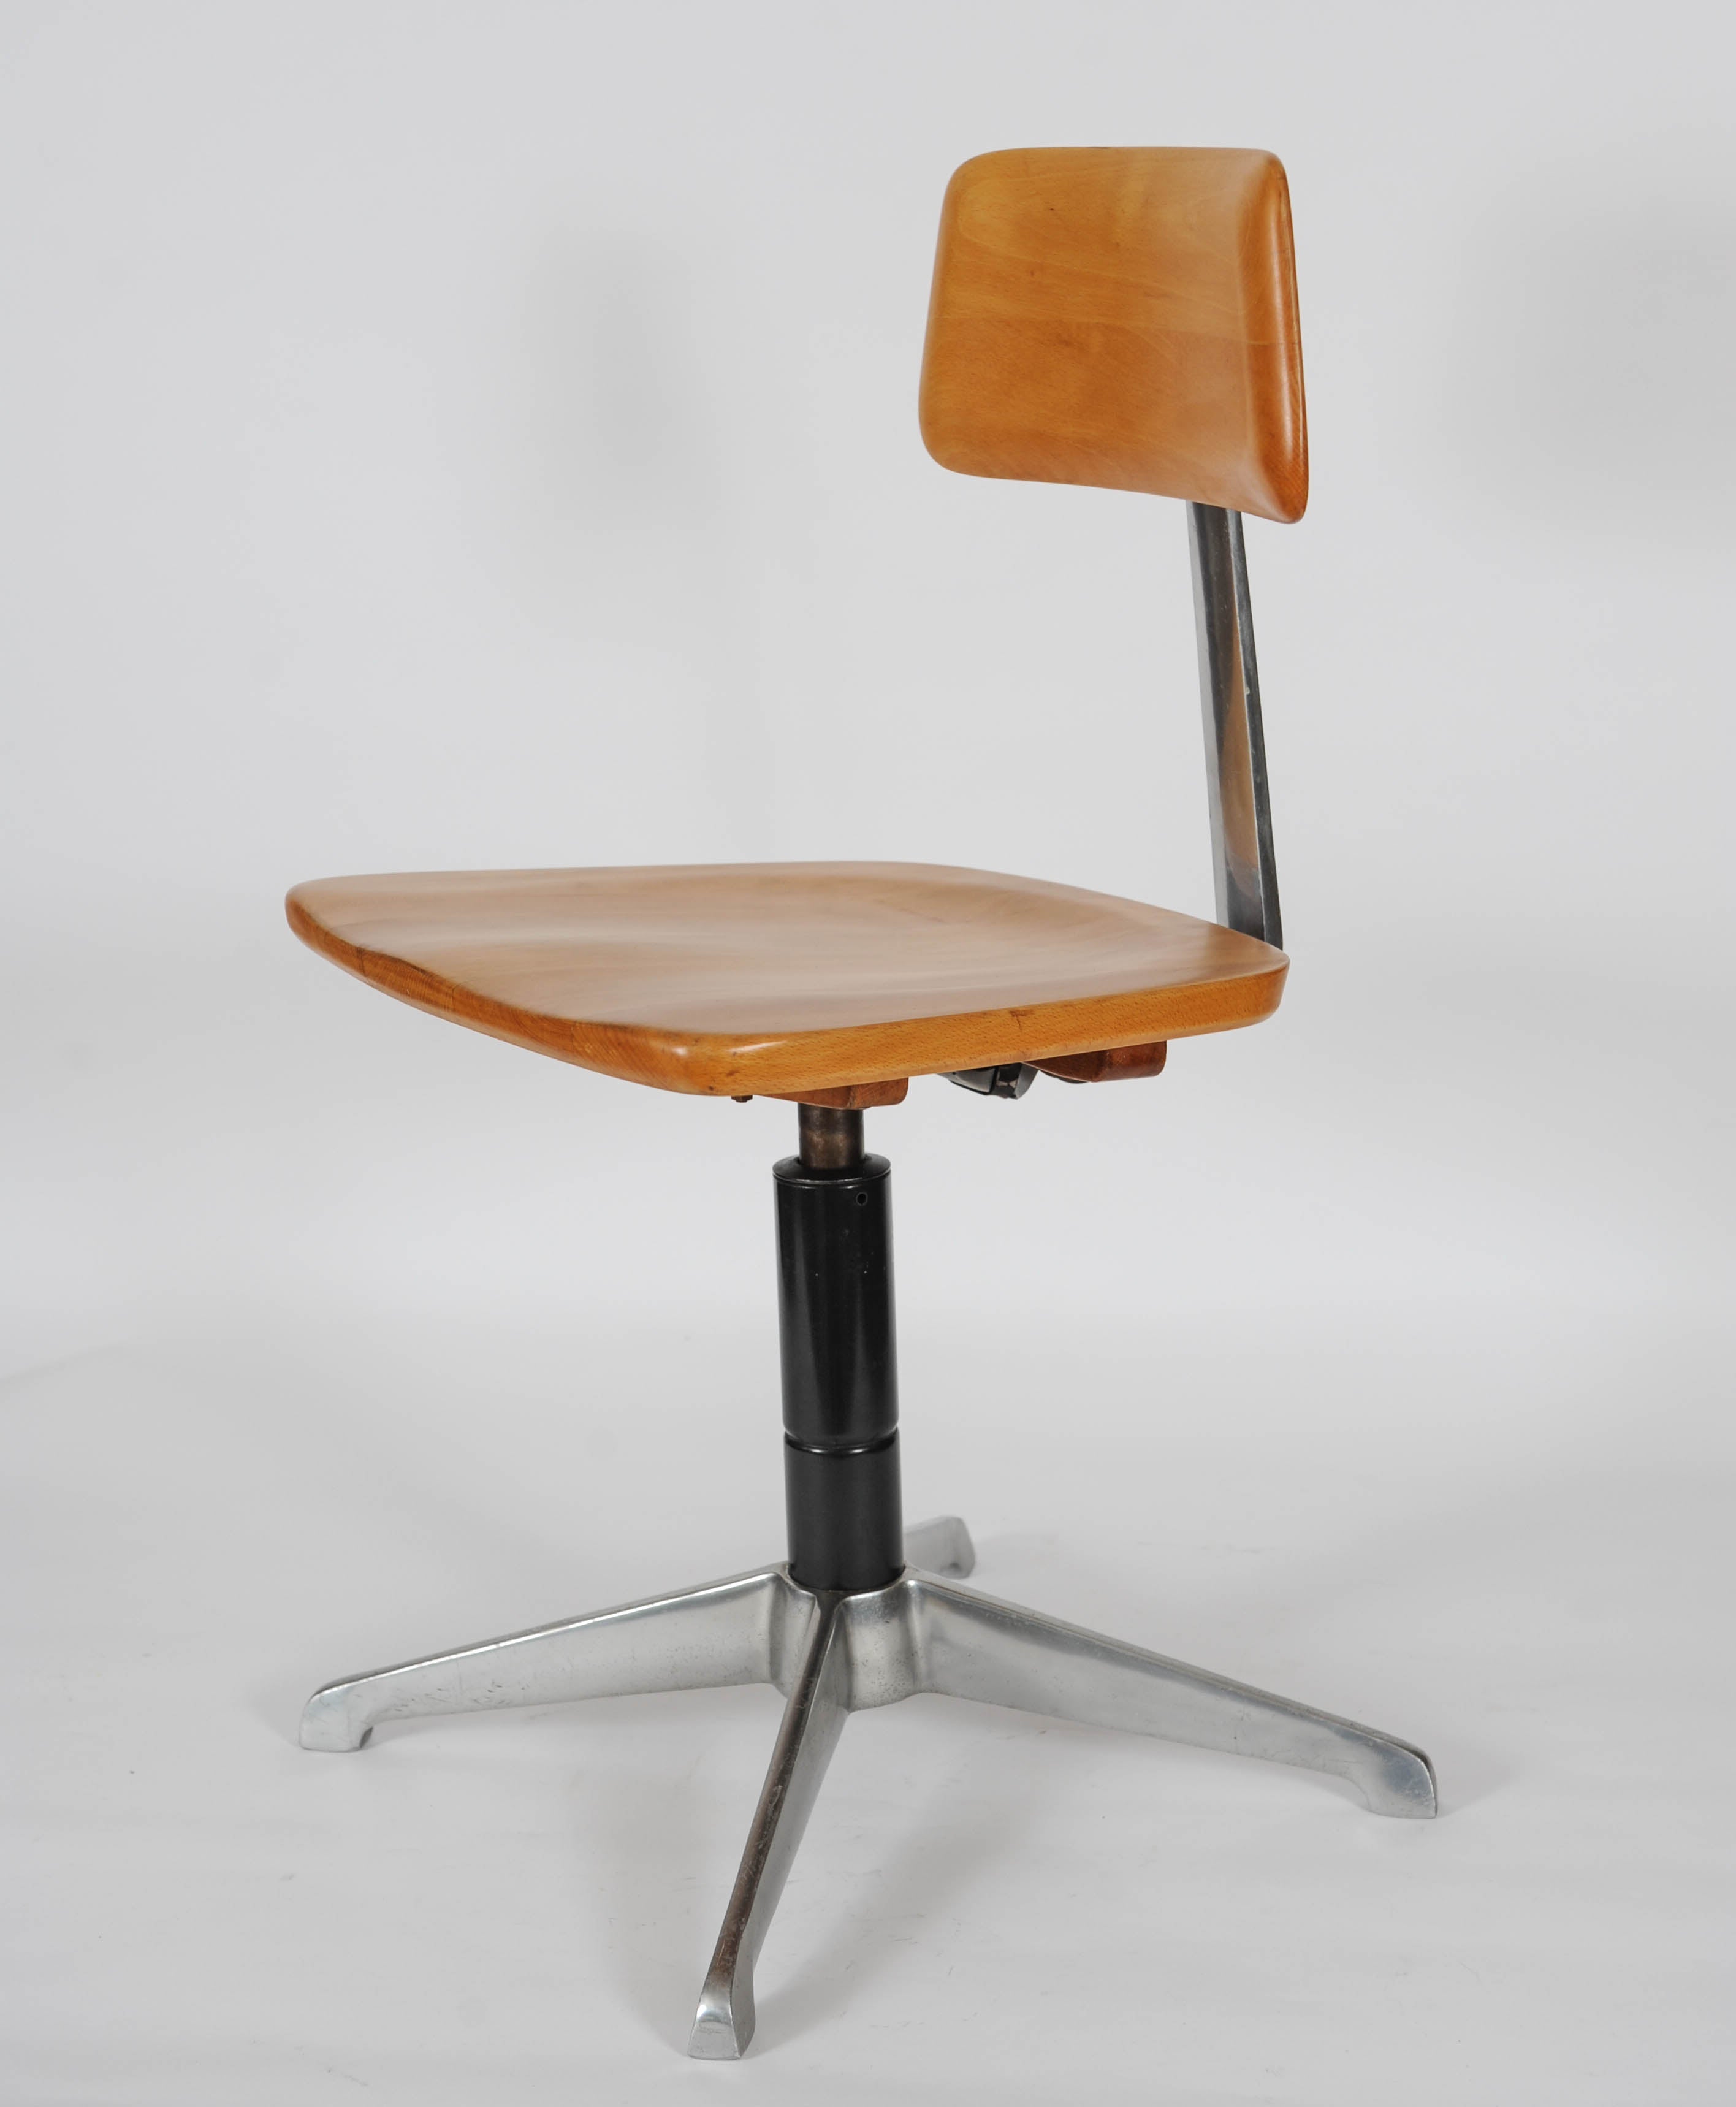 Midcentury Architect's Chair made of Stainless Steel and Wood named Sedus 2